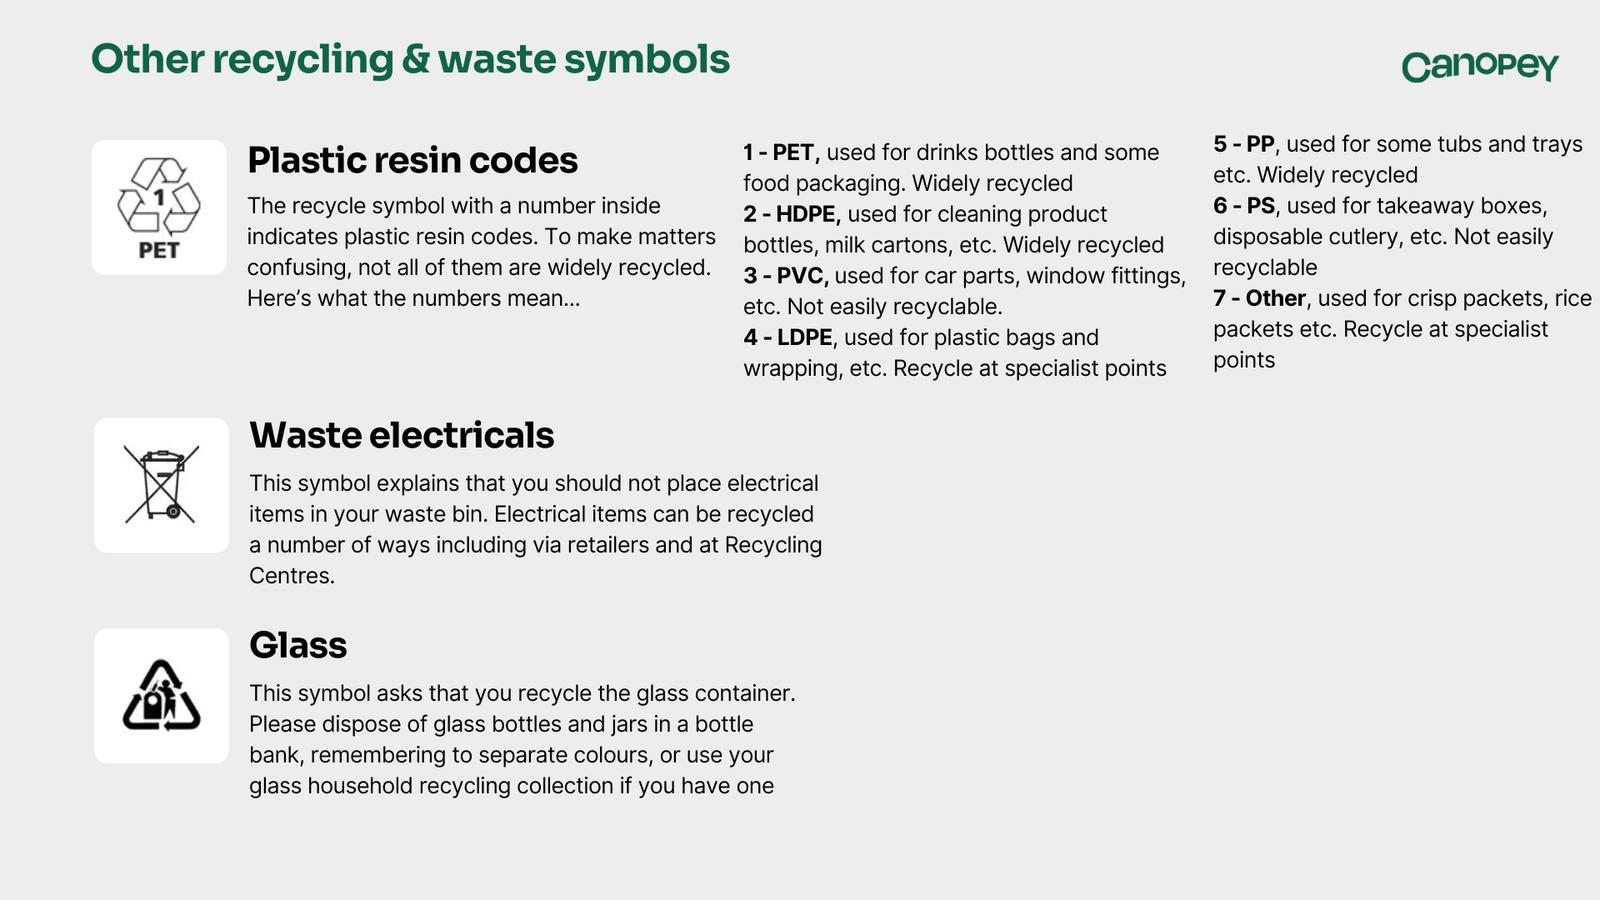 An infographic showing other recycling & waste symbols